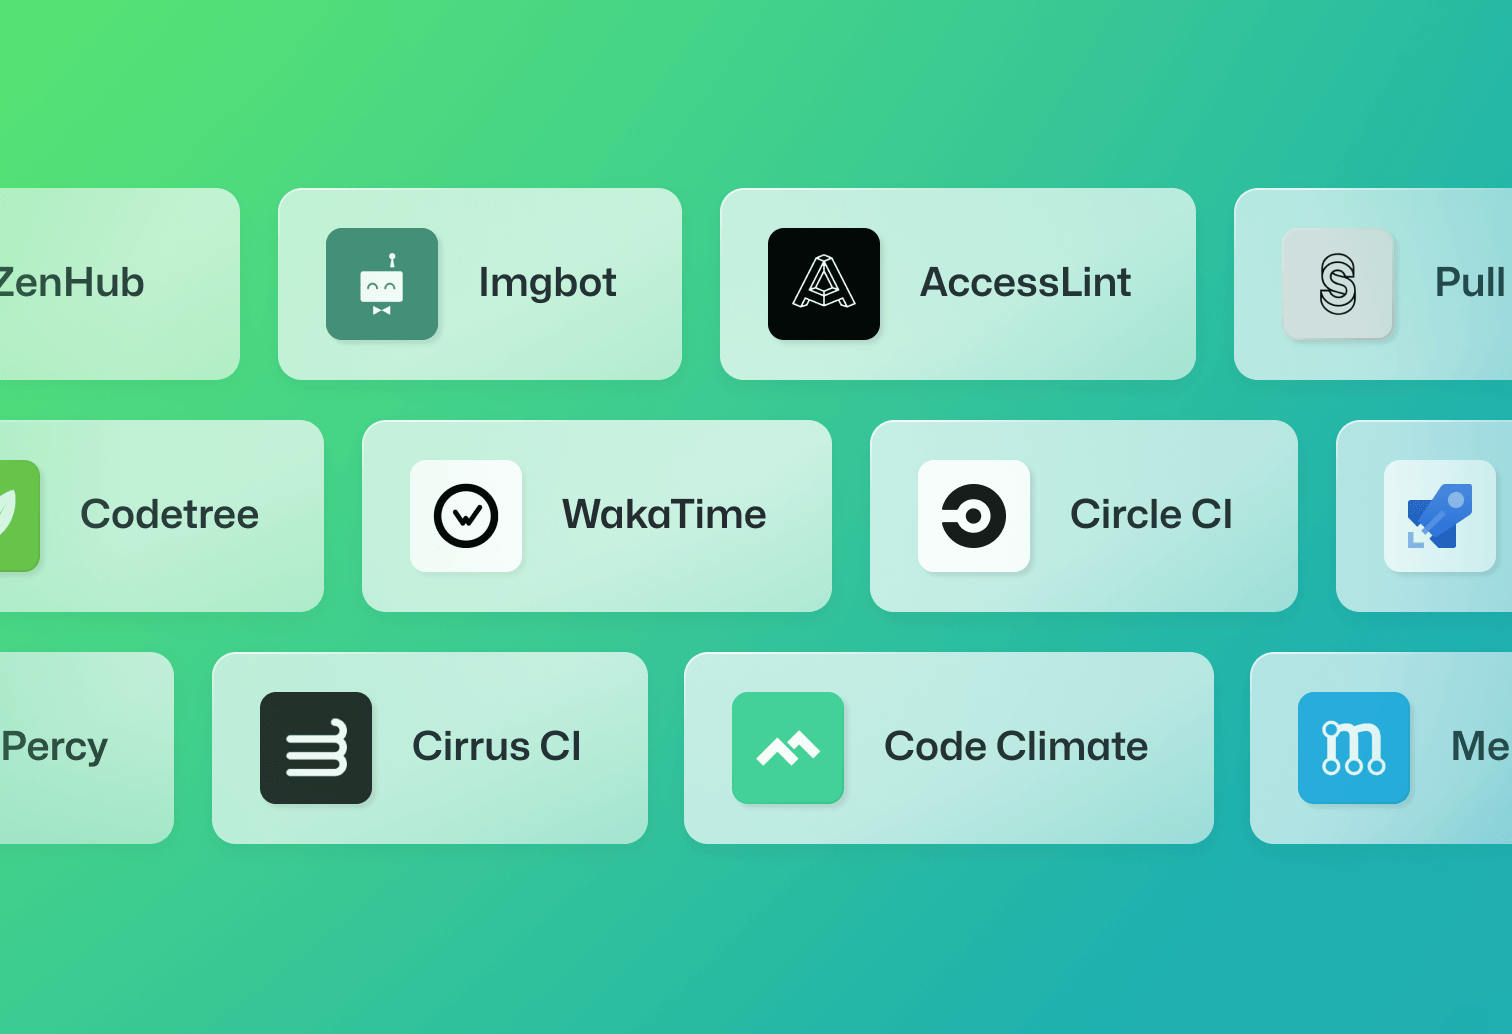 A collection of application icons for various development tools like Imgbot, AccessLint, WakaTime, Circle CI, Cirrus CI and Code Climate.